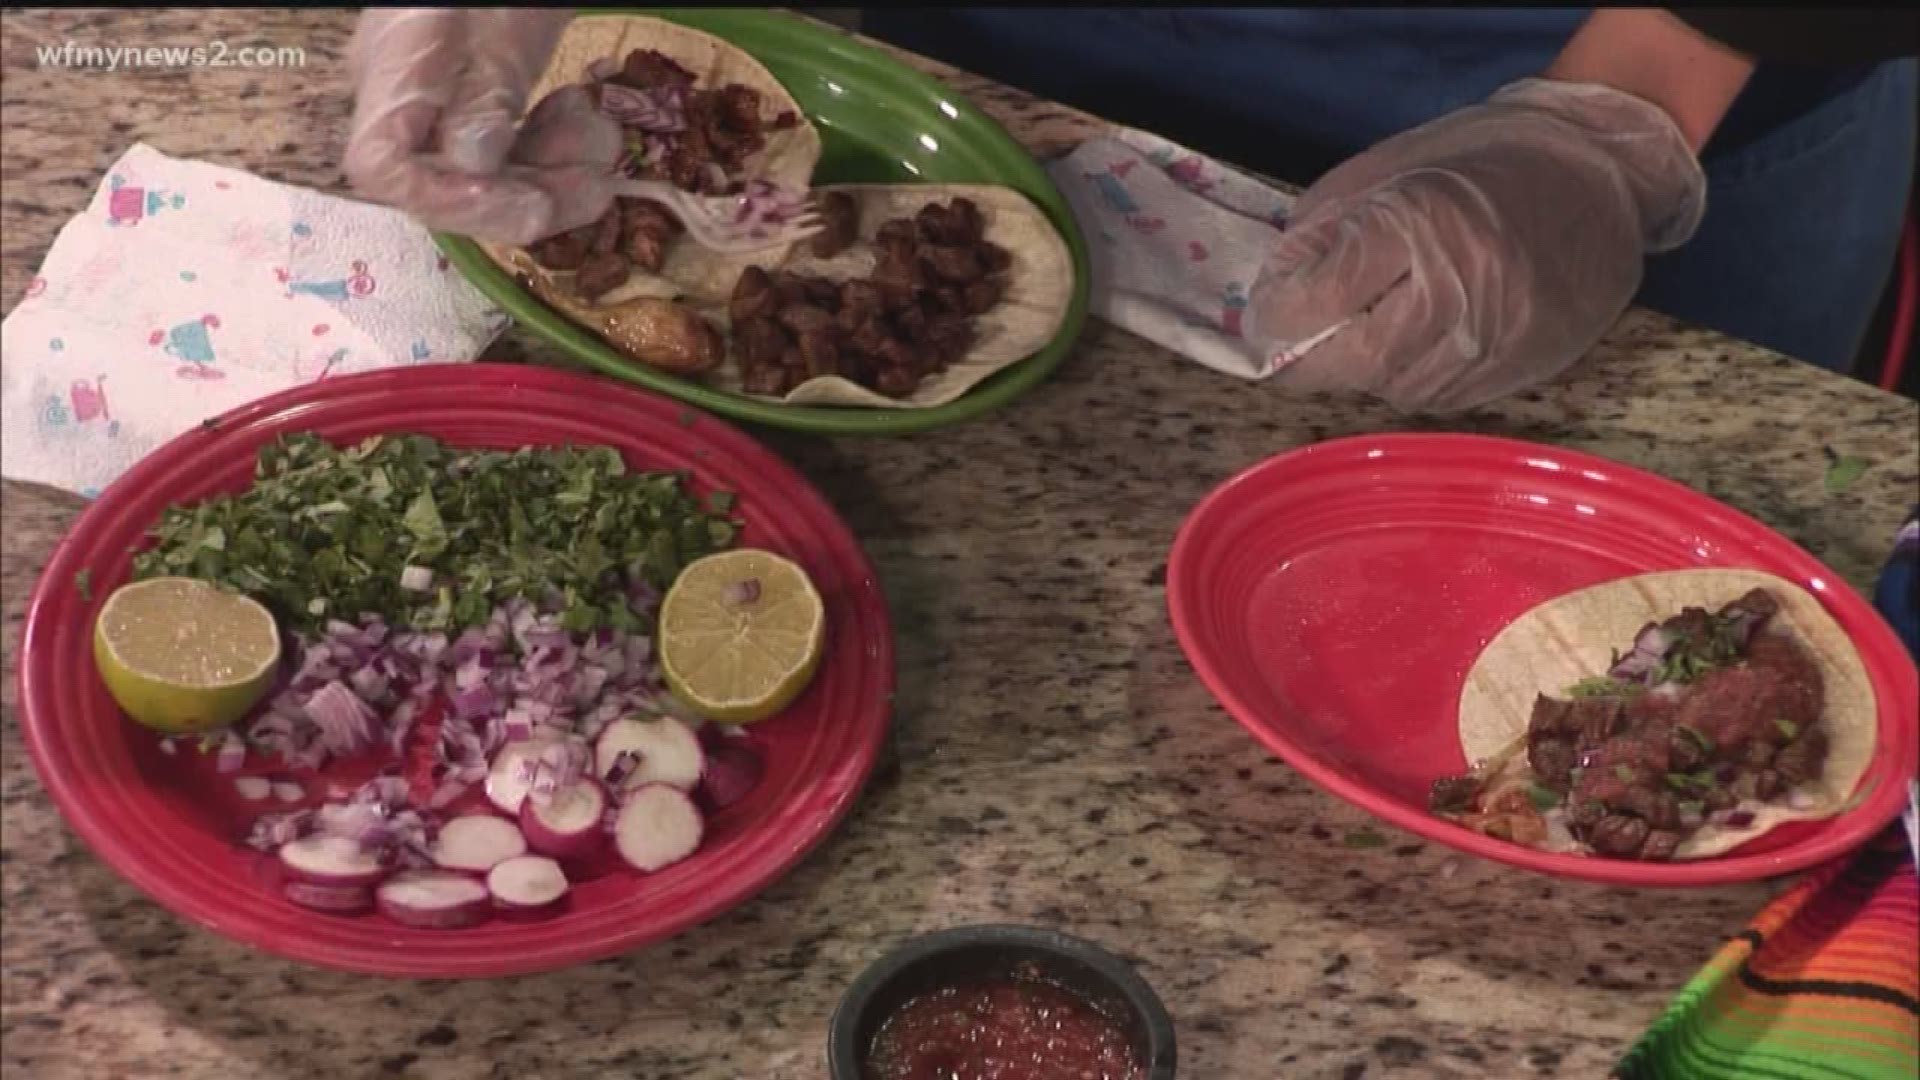 La Fiesta is back in studio for two full days of recipes!